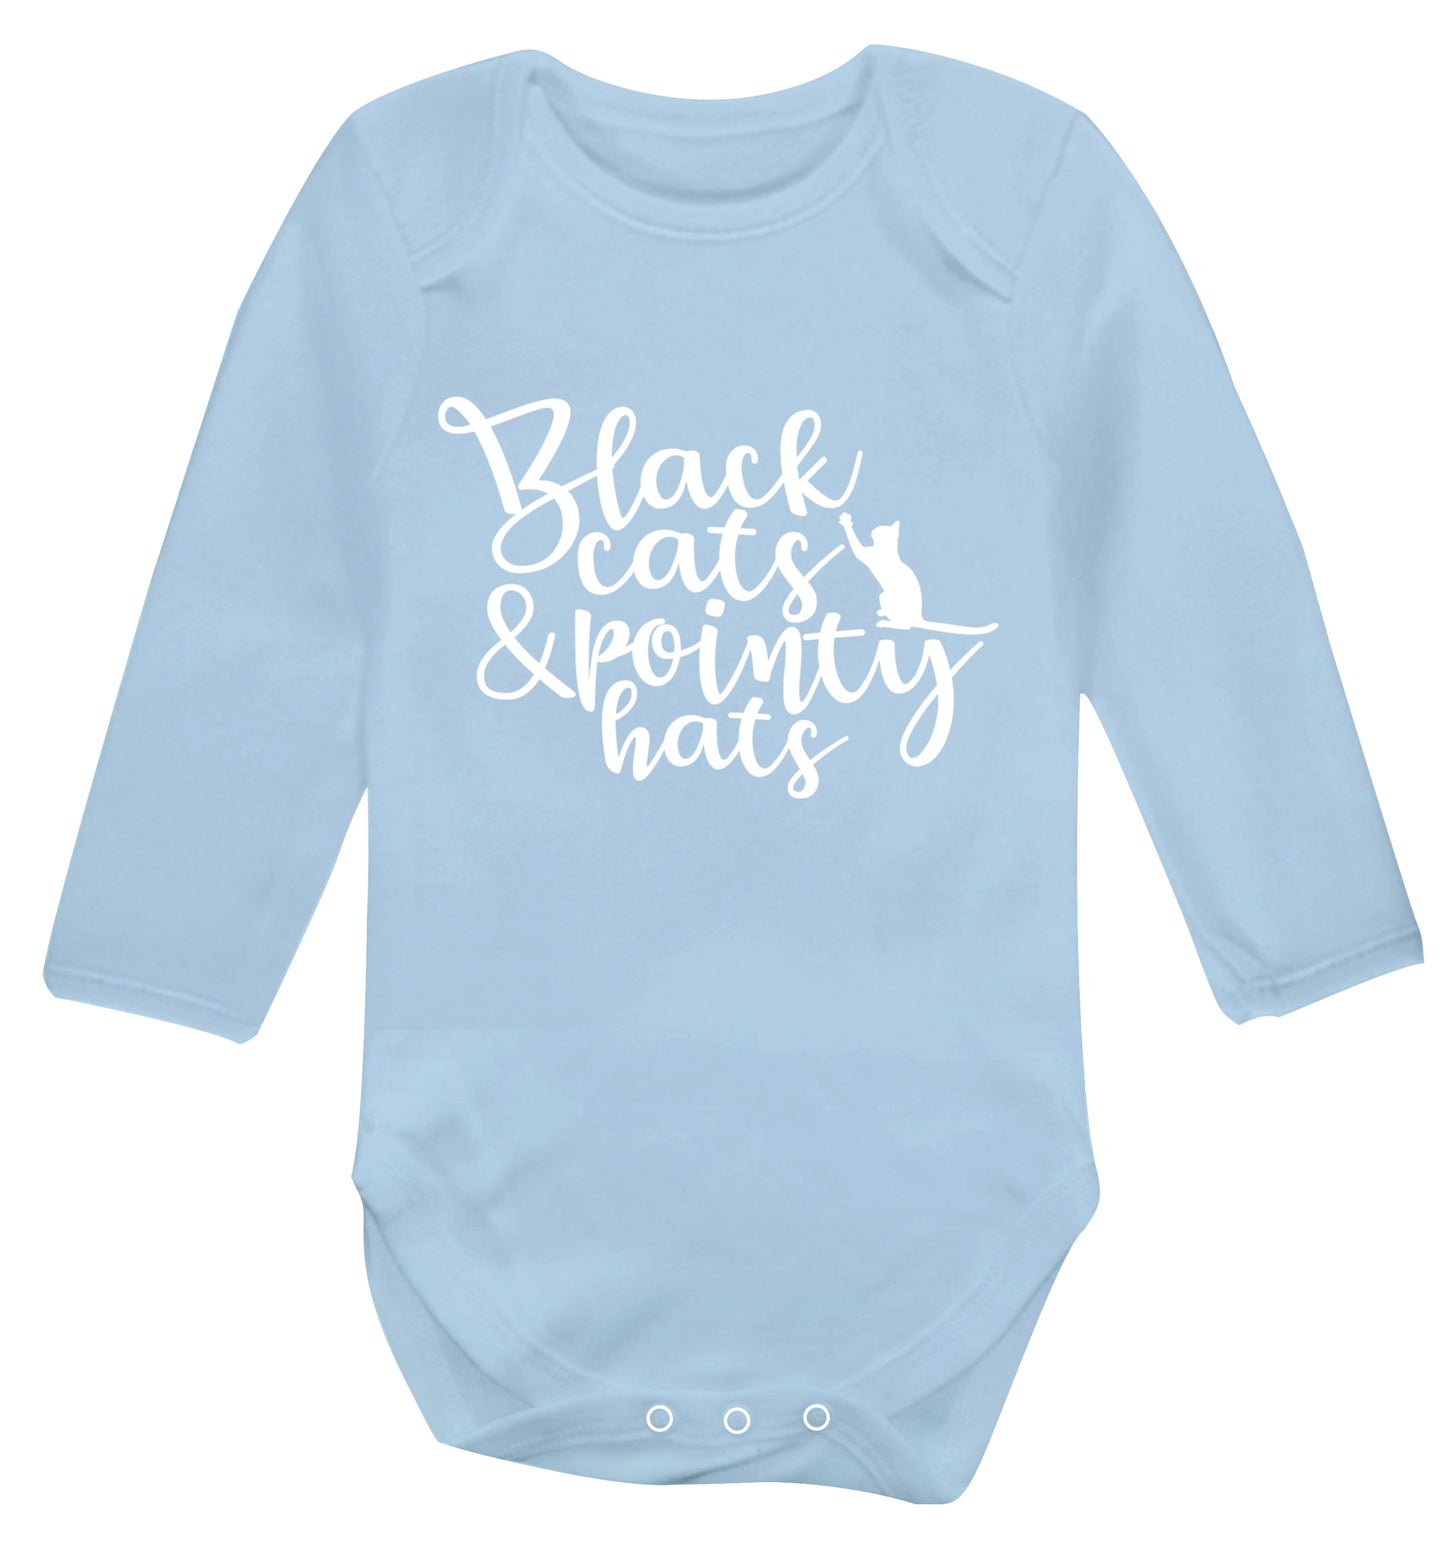 Black cats and pointy hats Baby Vest long sleeved pale blue 6-12 months